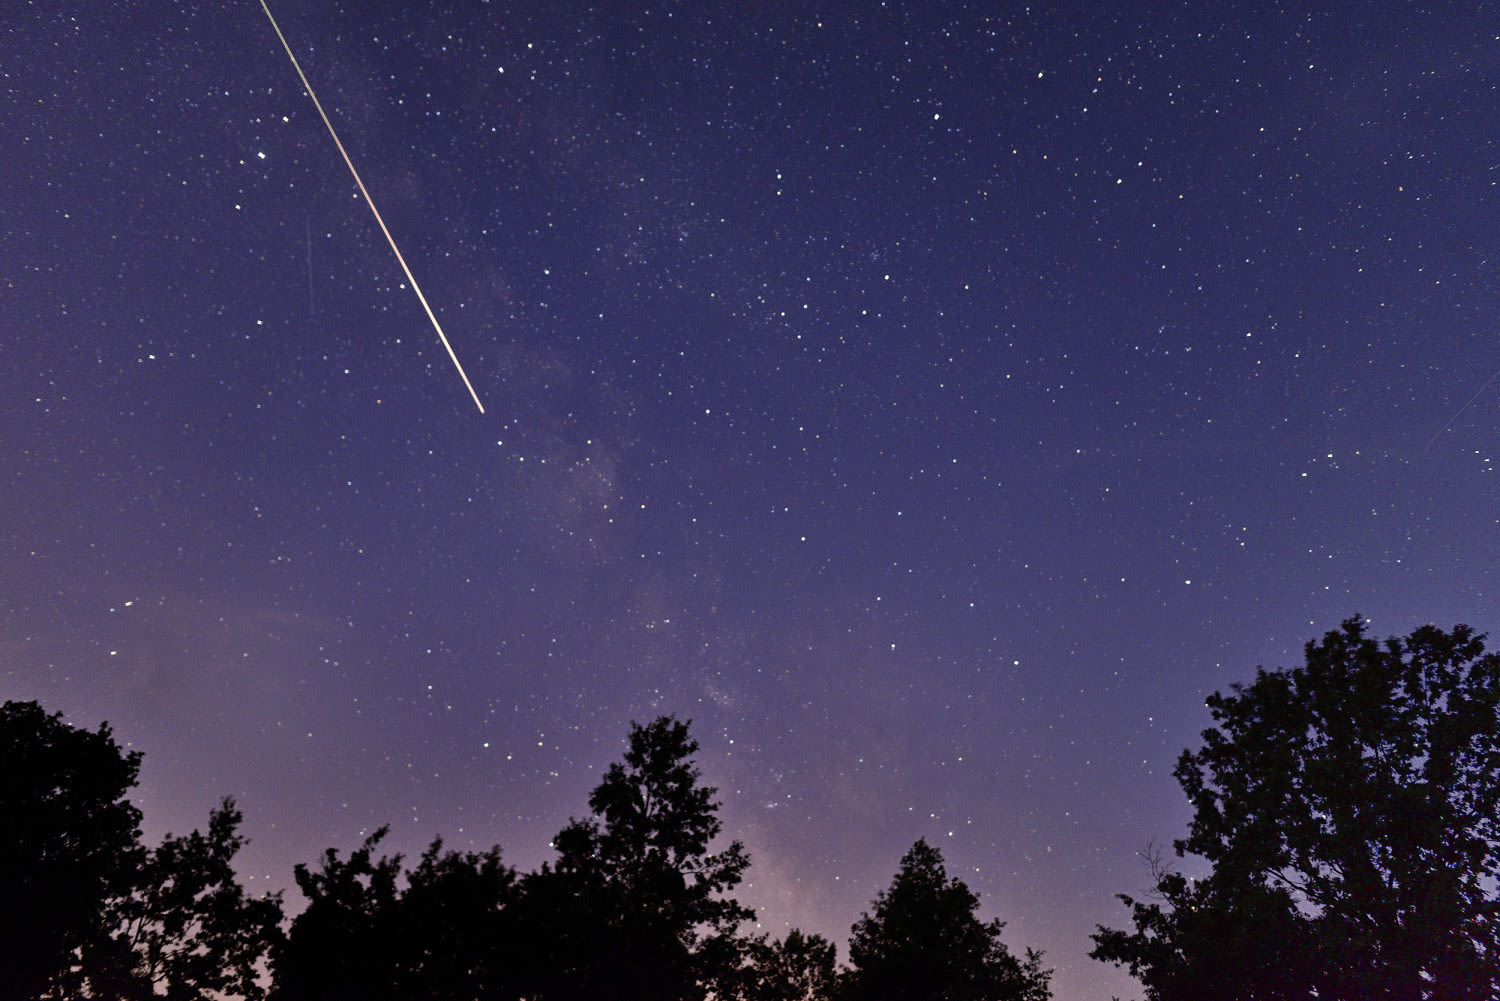 Perseid meteor shower, one of the most dramatic of the year, is underway